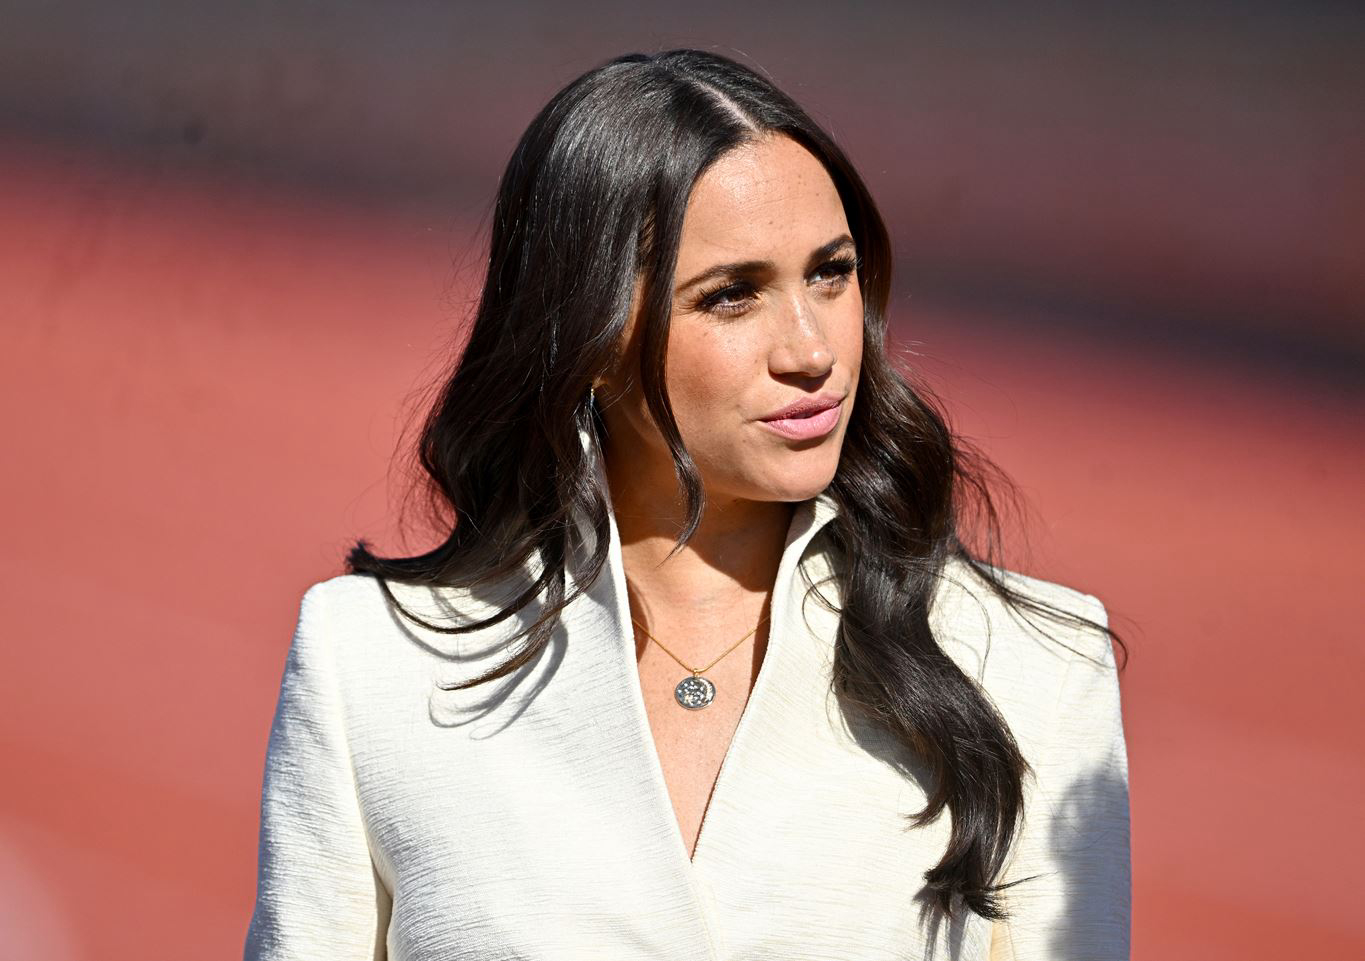 Meghan Markle Finally Reveals She is Nigerian, After Hiding Secret for Many Years | The African Exponent.